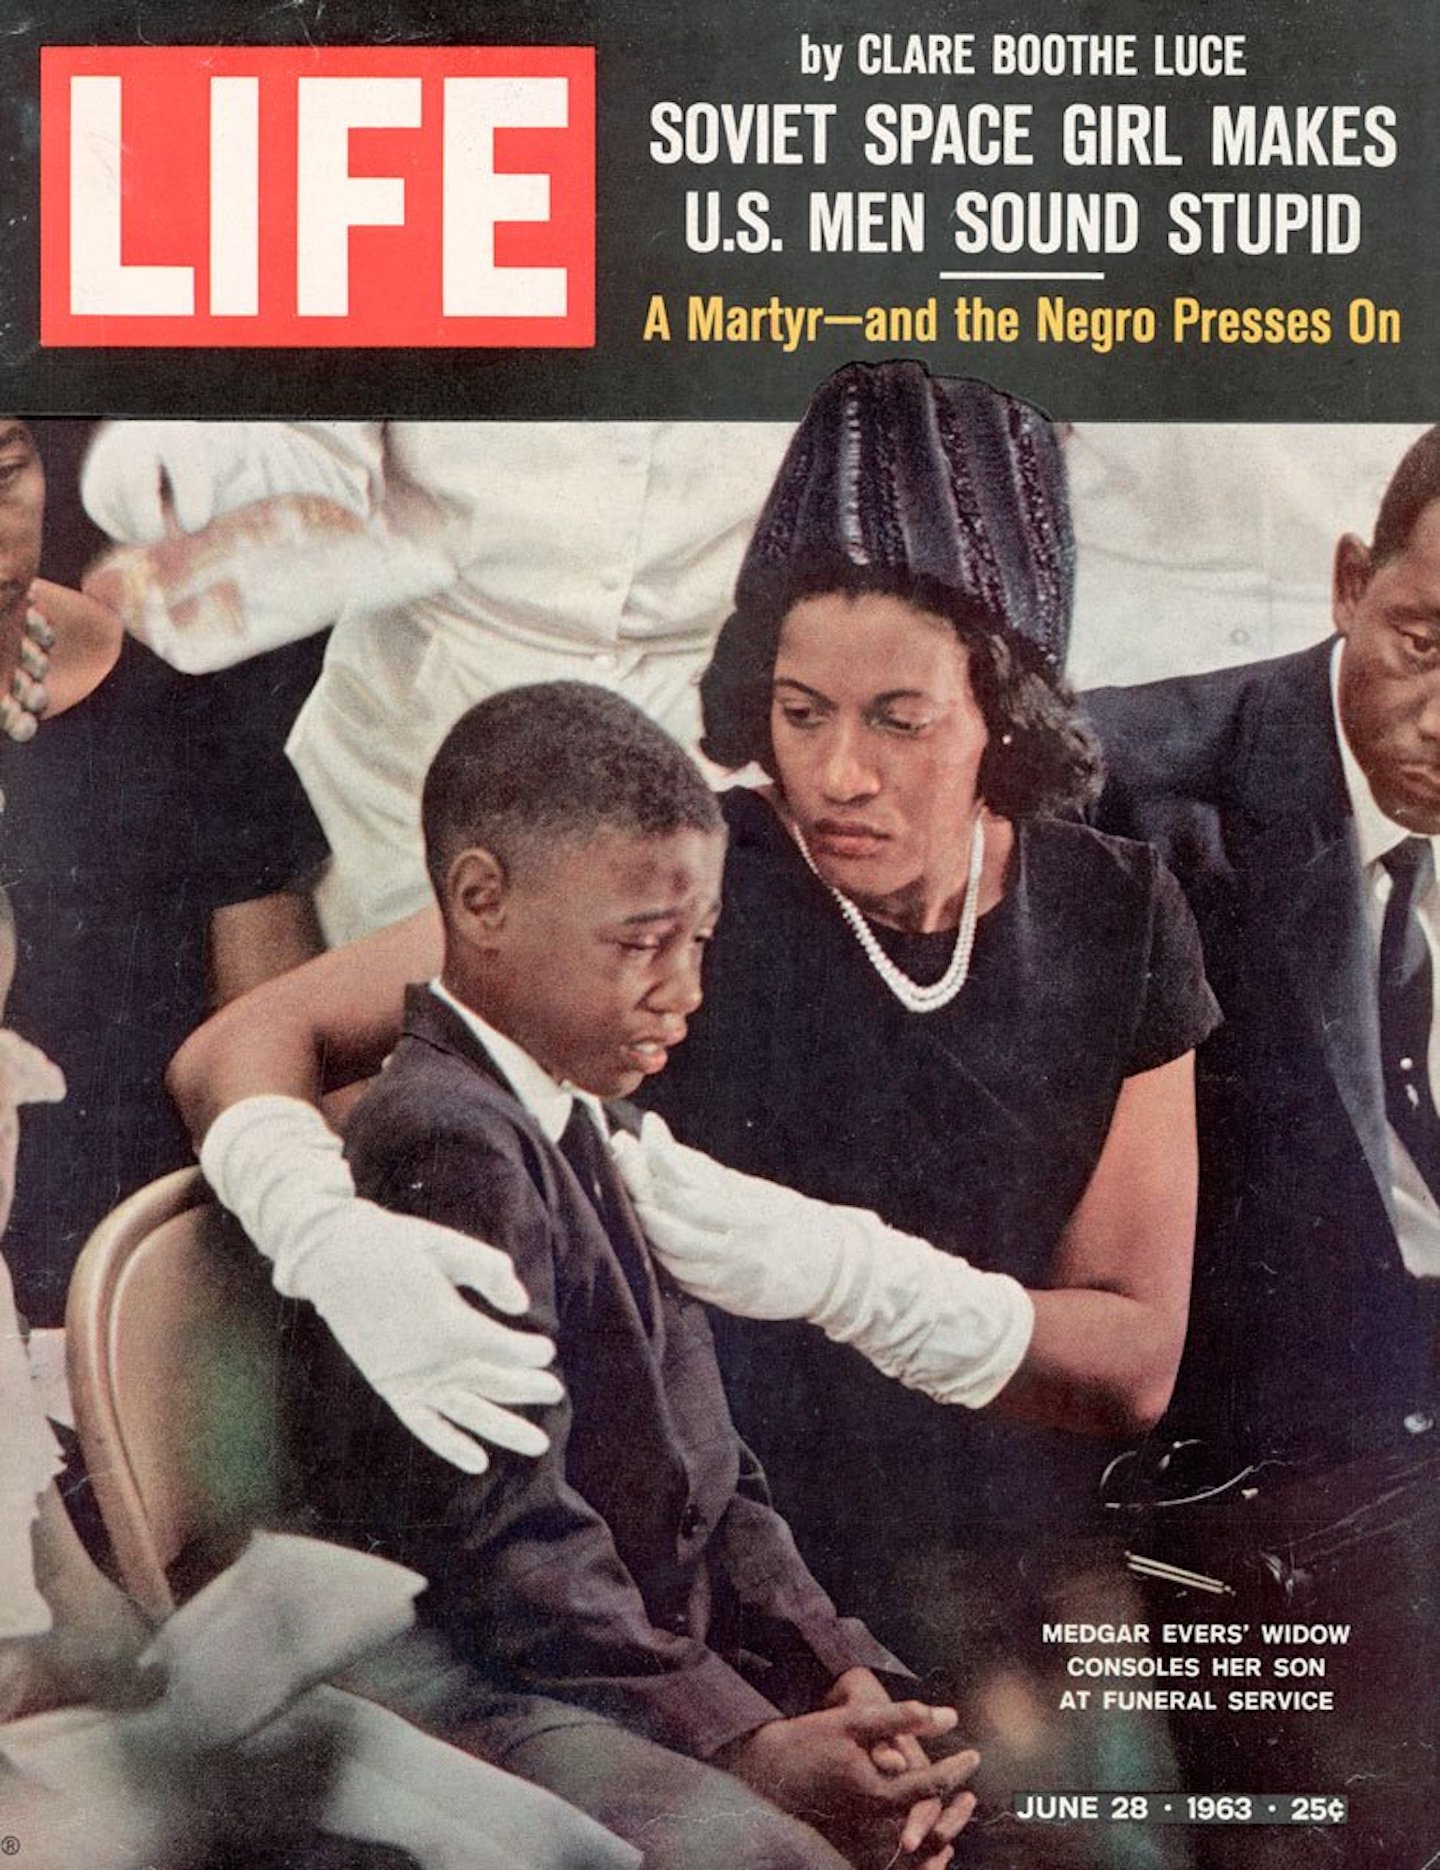 COMMON on Twitter: "On this day 55 years ago, Civil Rights Leader Medgar Evers was assassinated by the KKK. He was only 37 years old. https://t.co/tHxA6y8OBt" / Twitter